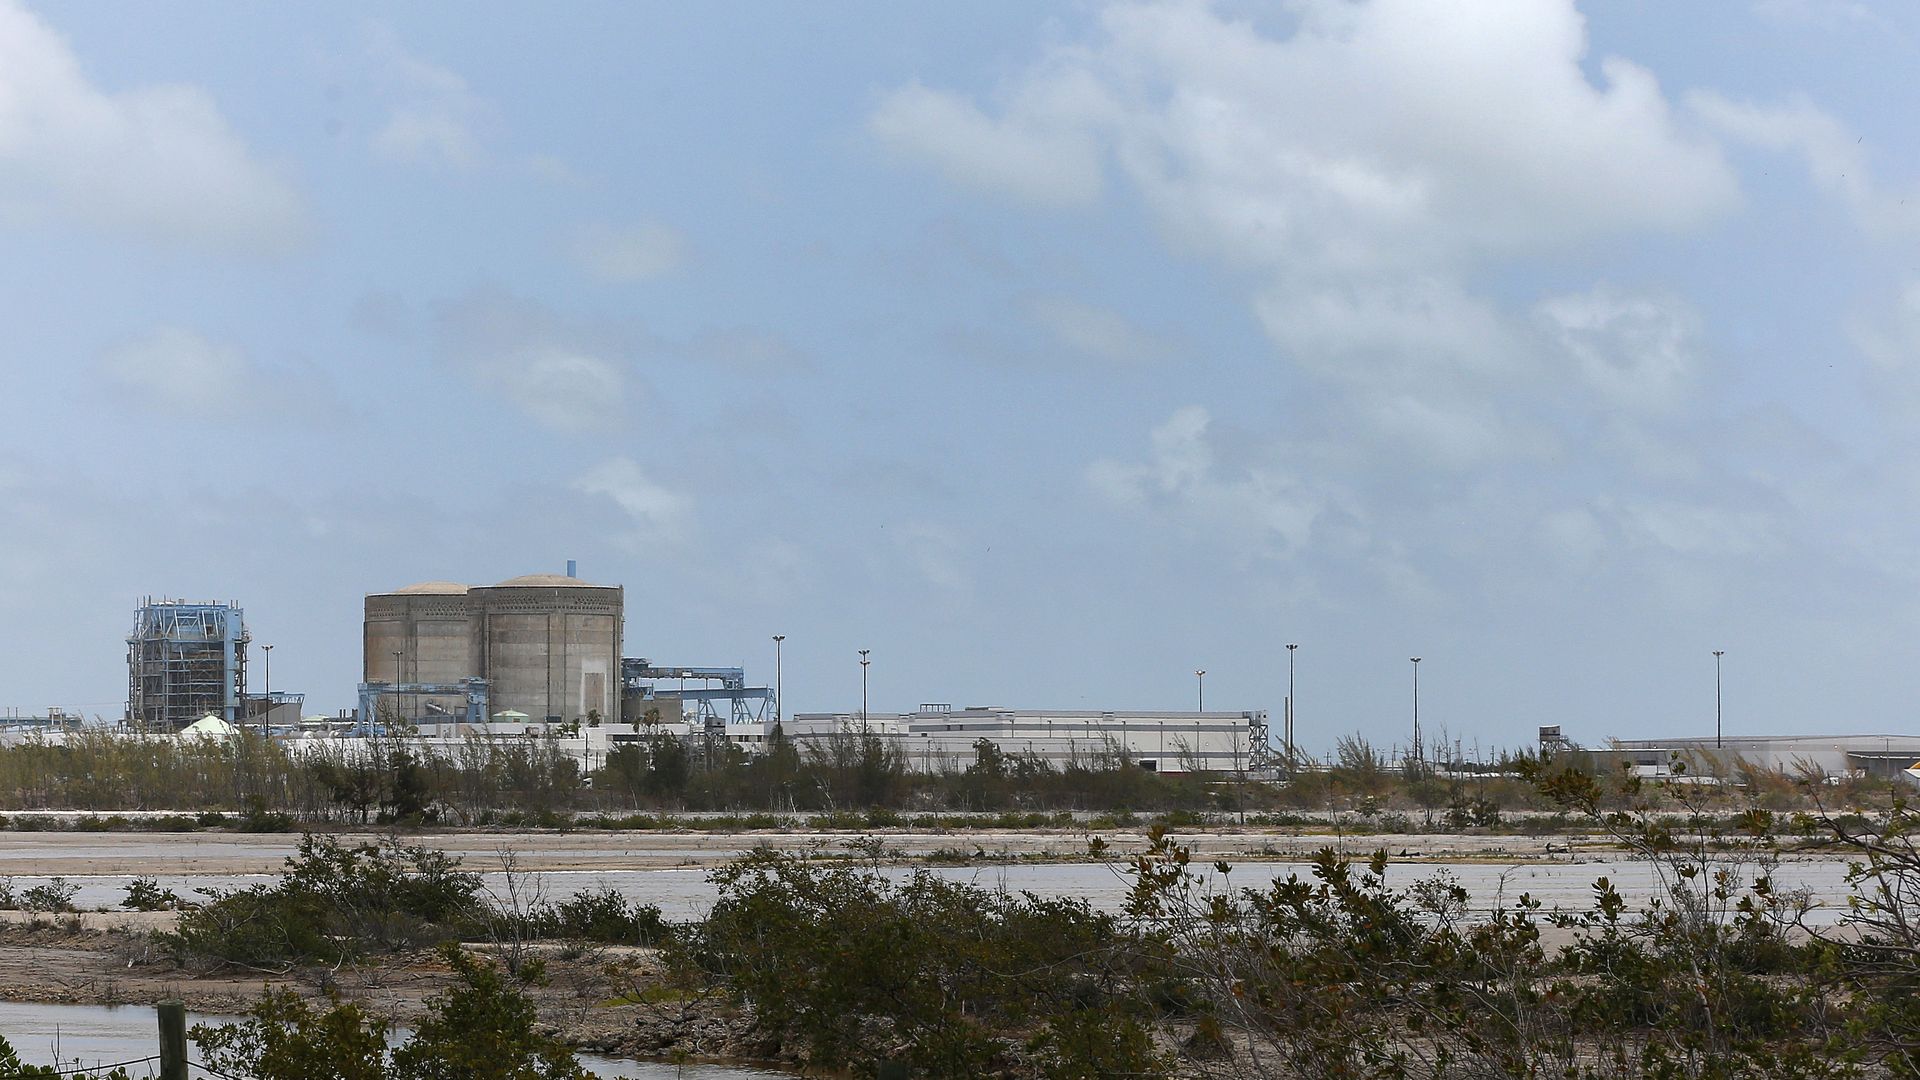 A nuclear power plant in Florida.